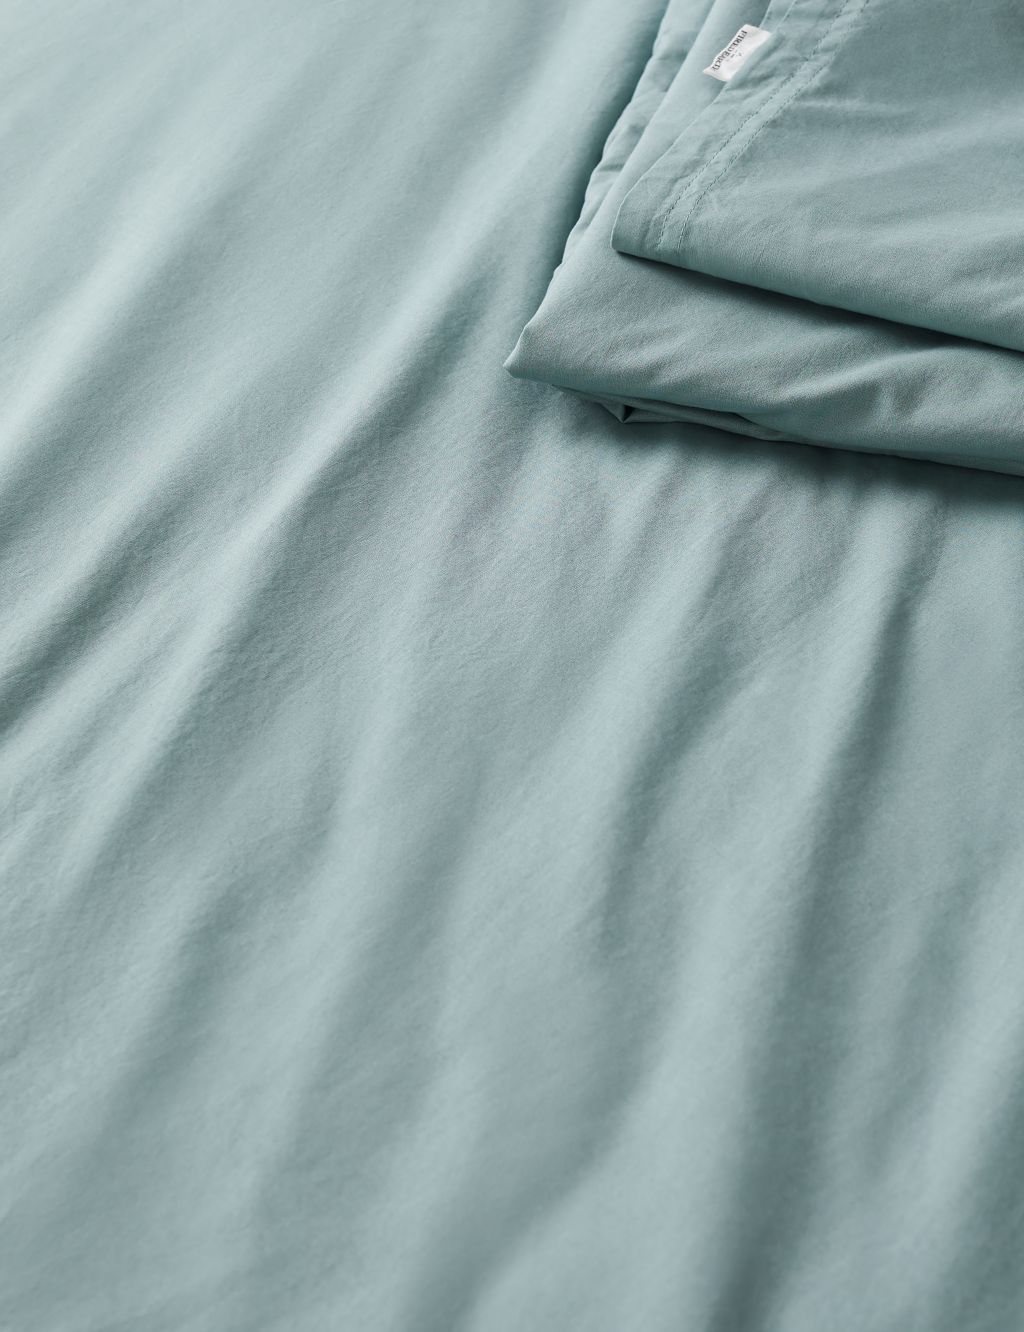 Washed Cotton Deep Fitted Sheet image 3